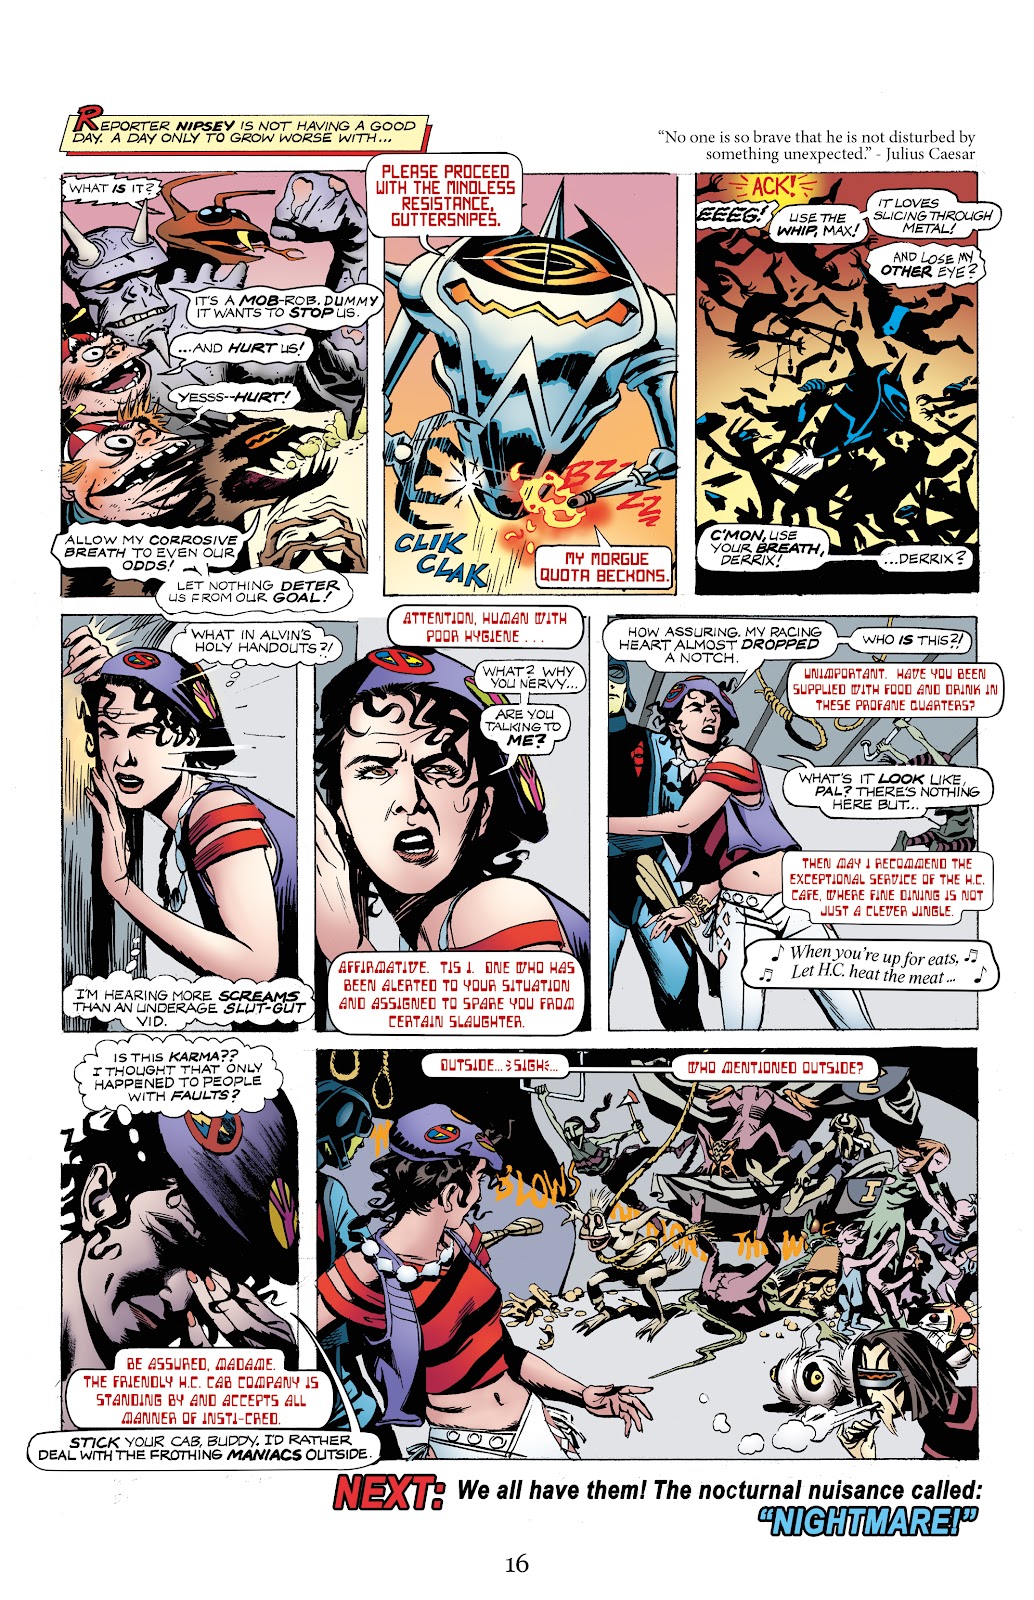 Nexus Newspaper Strips Vol 2: The Battle For Thuneworld issue 1 - Page 18